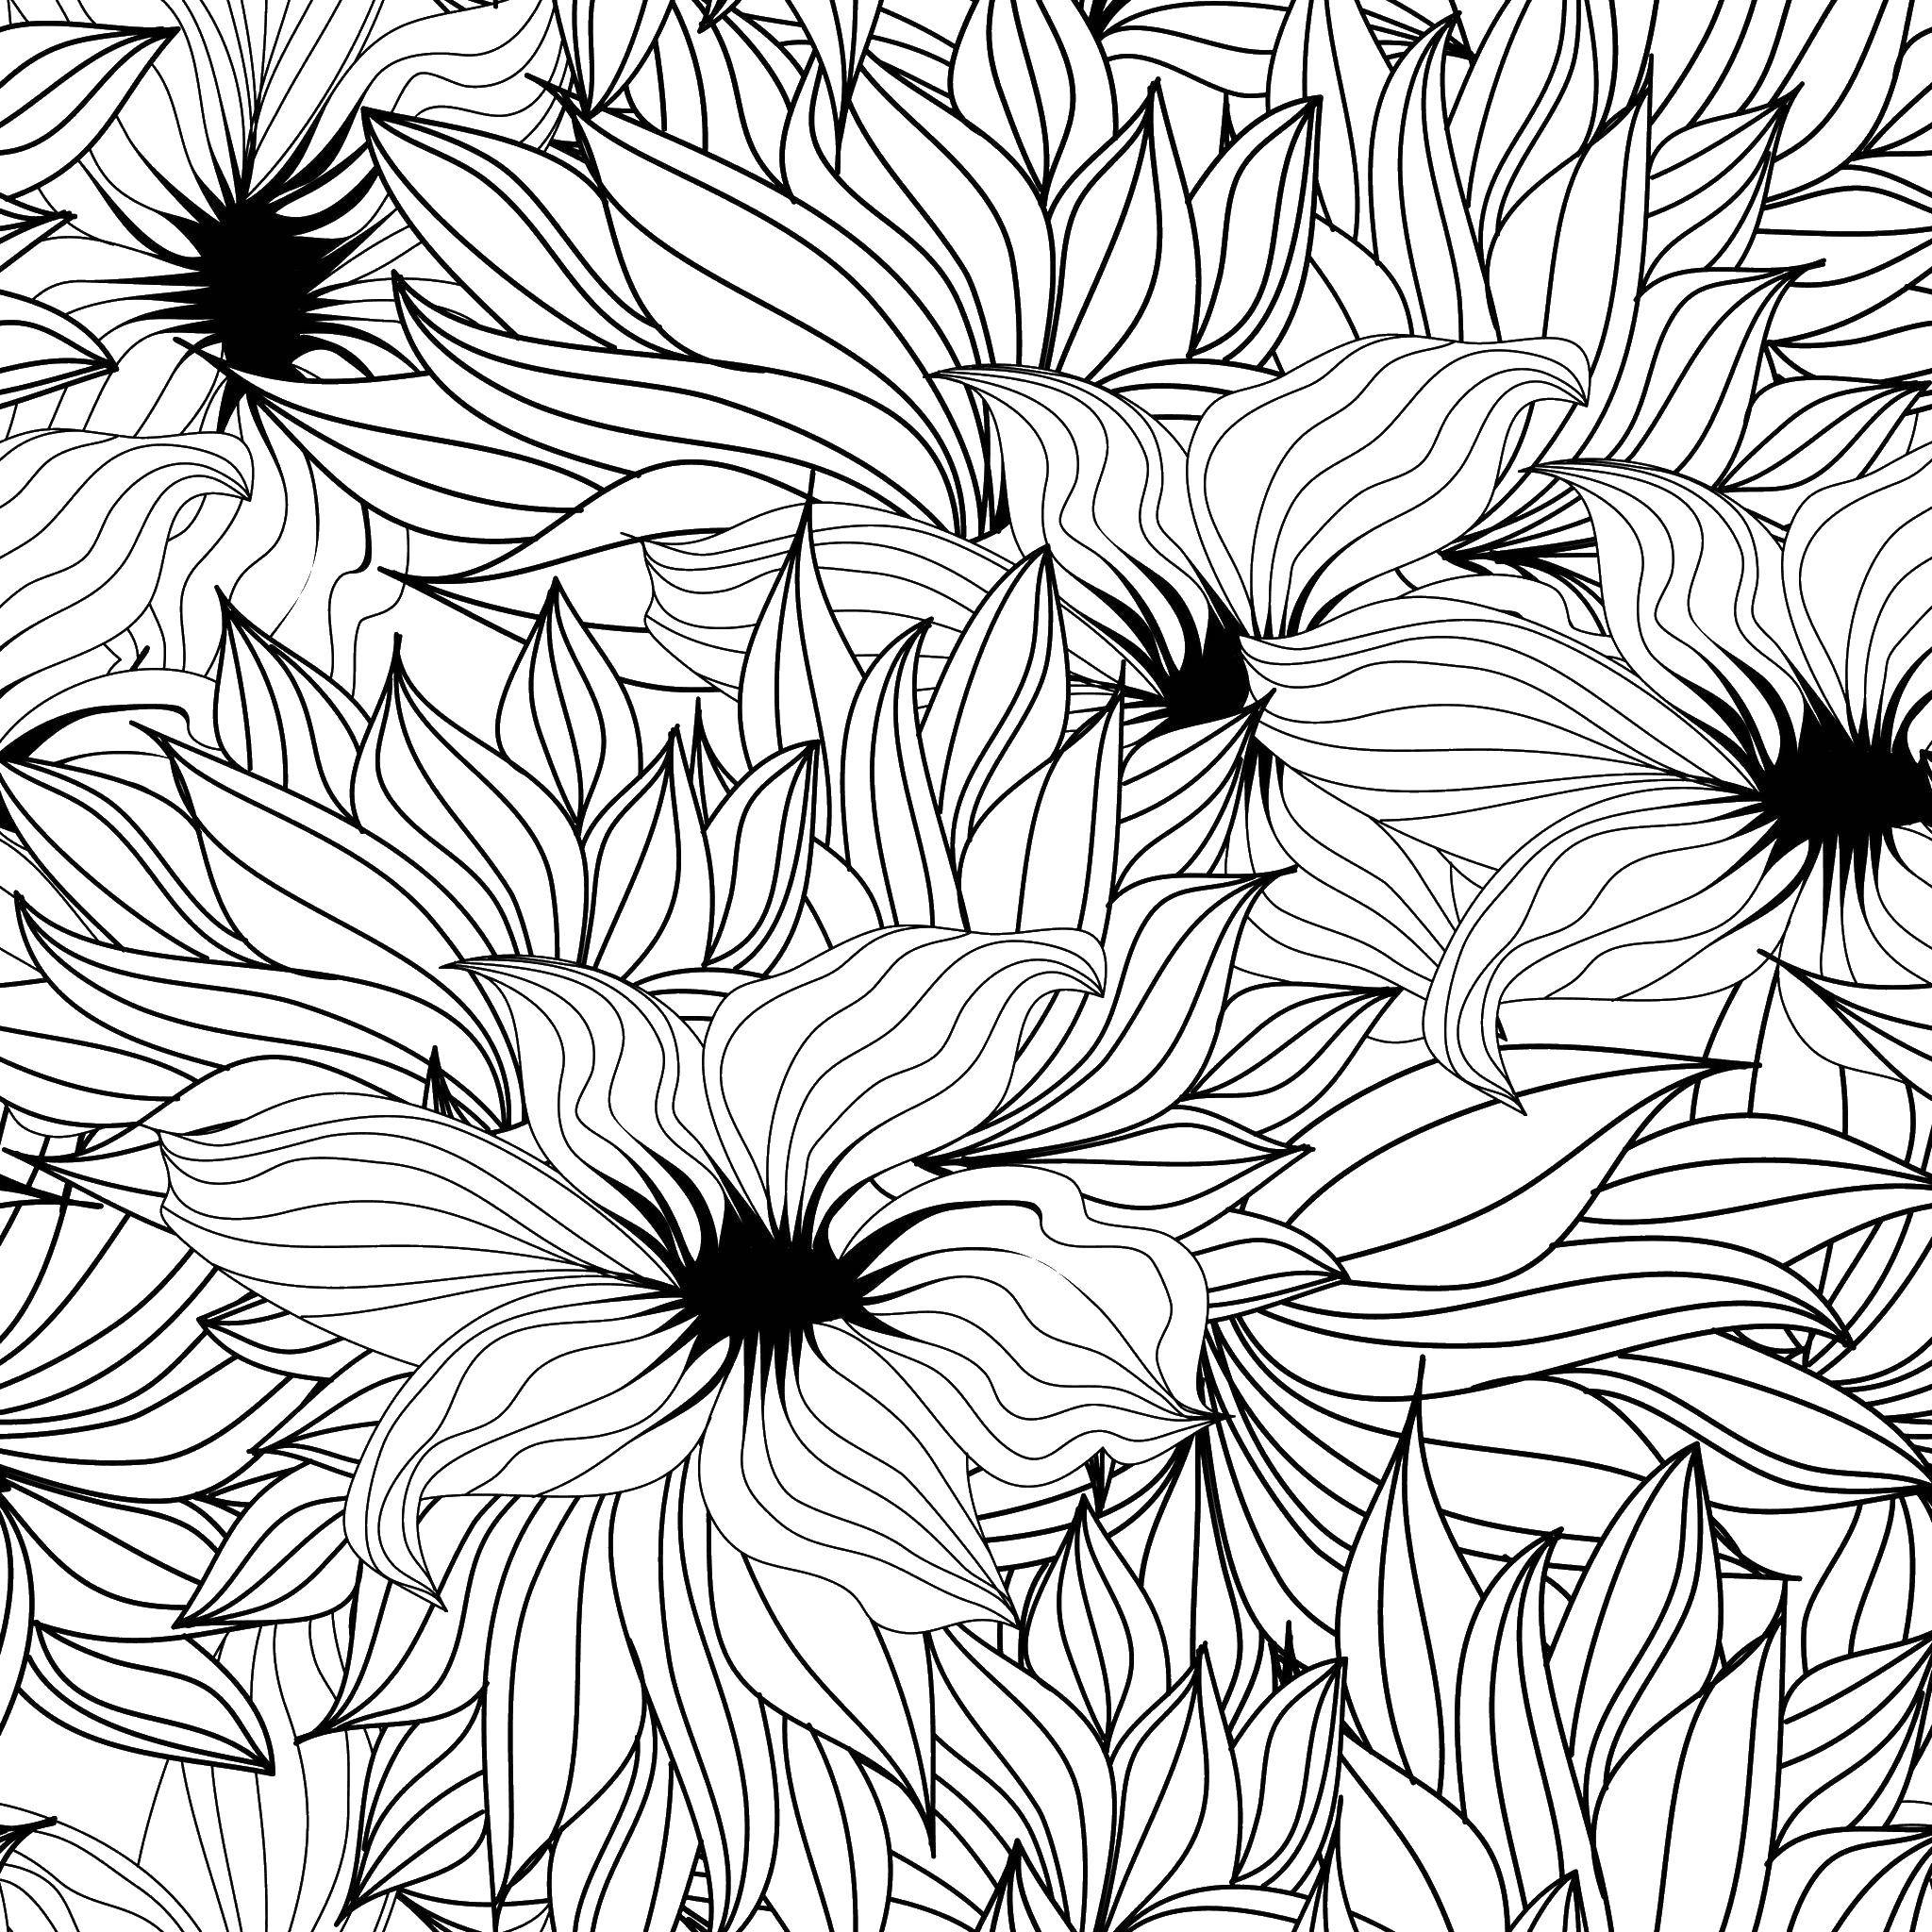 Coloring Flowers in the grass. Category coloring antistress. Tags:  Flowers.